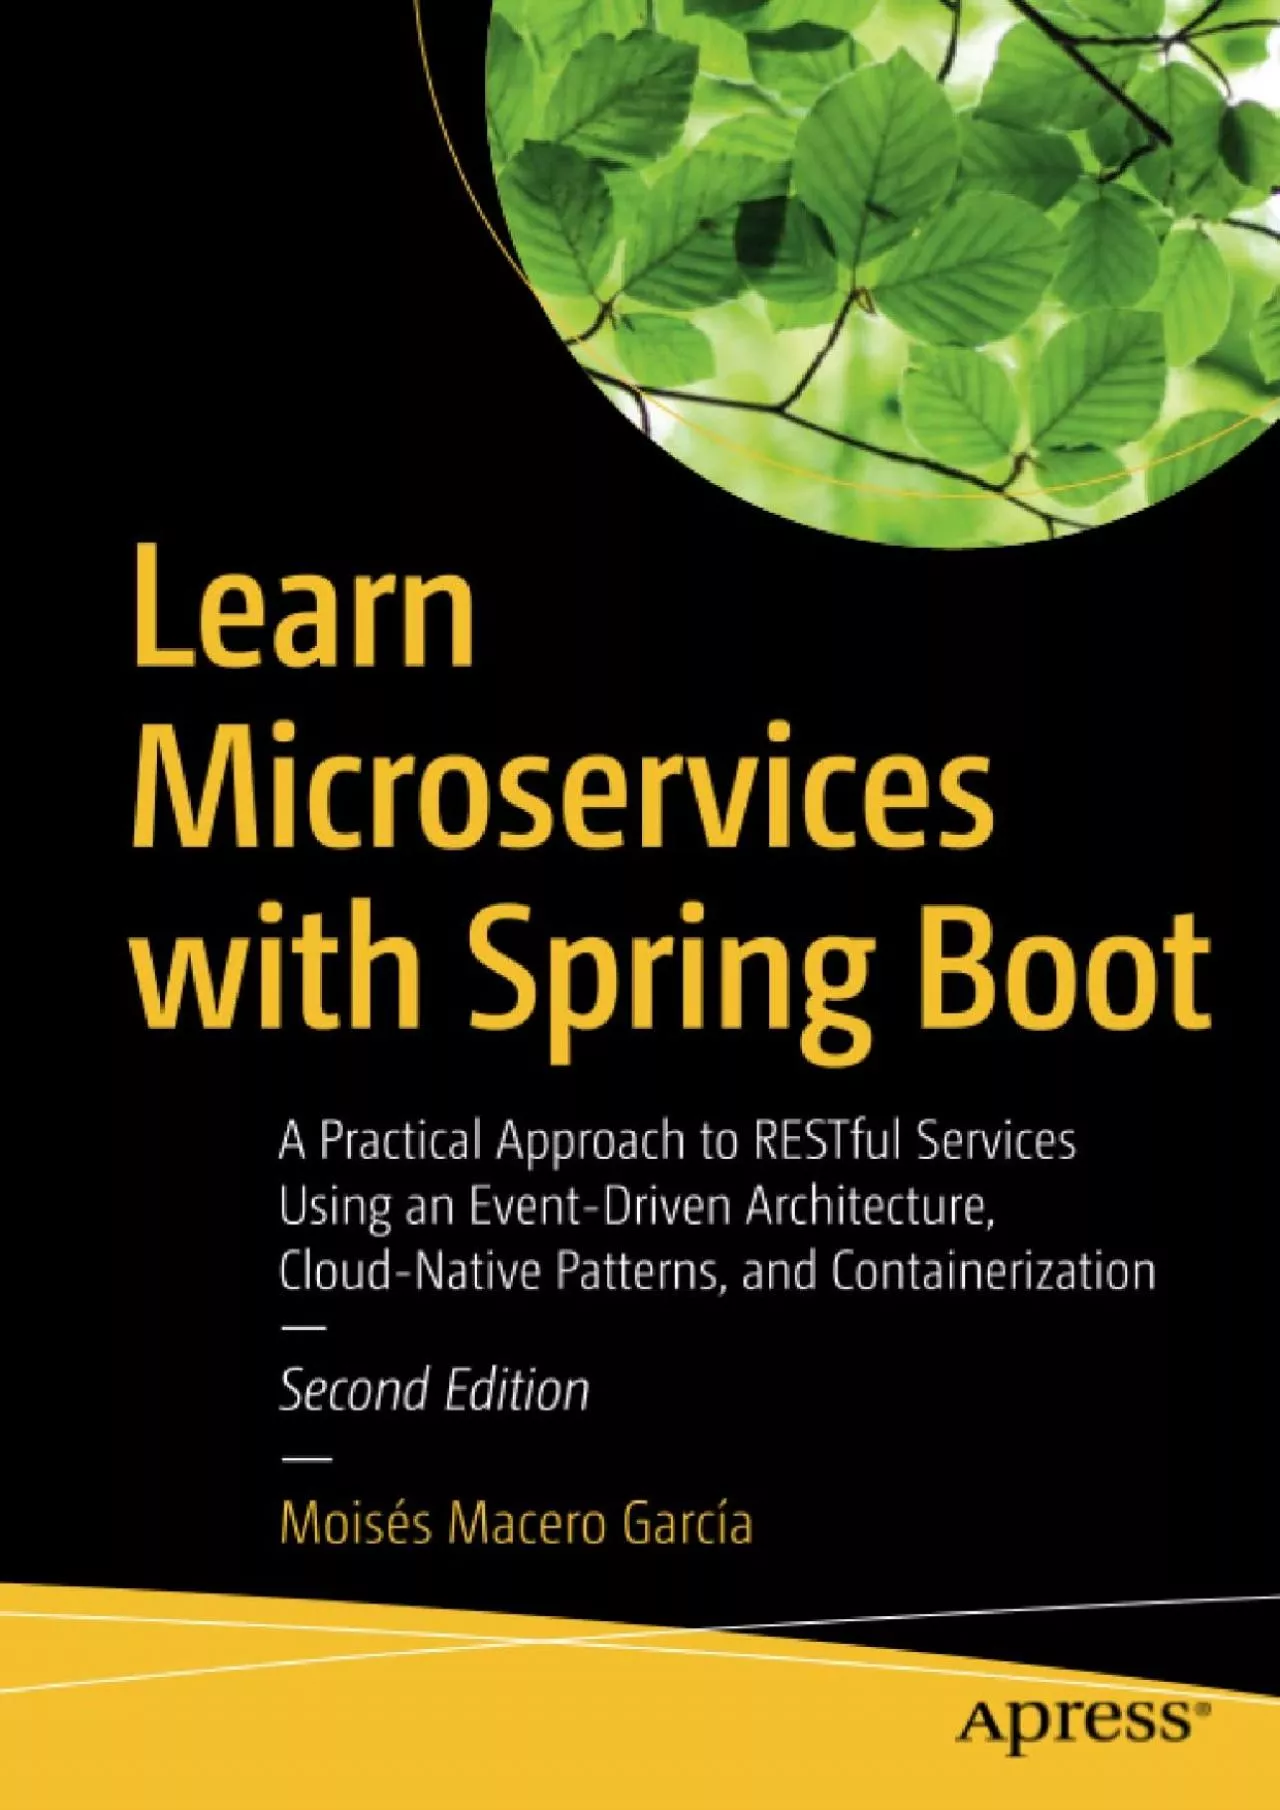 [BEST]-Learn Microservices with Spring Boot: A Practical Approach to RESTful Services